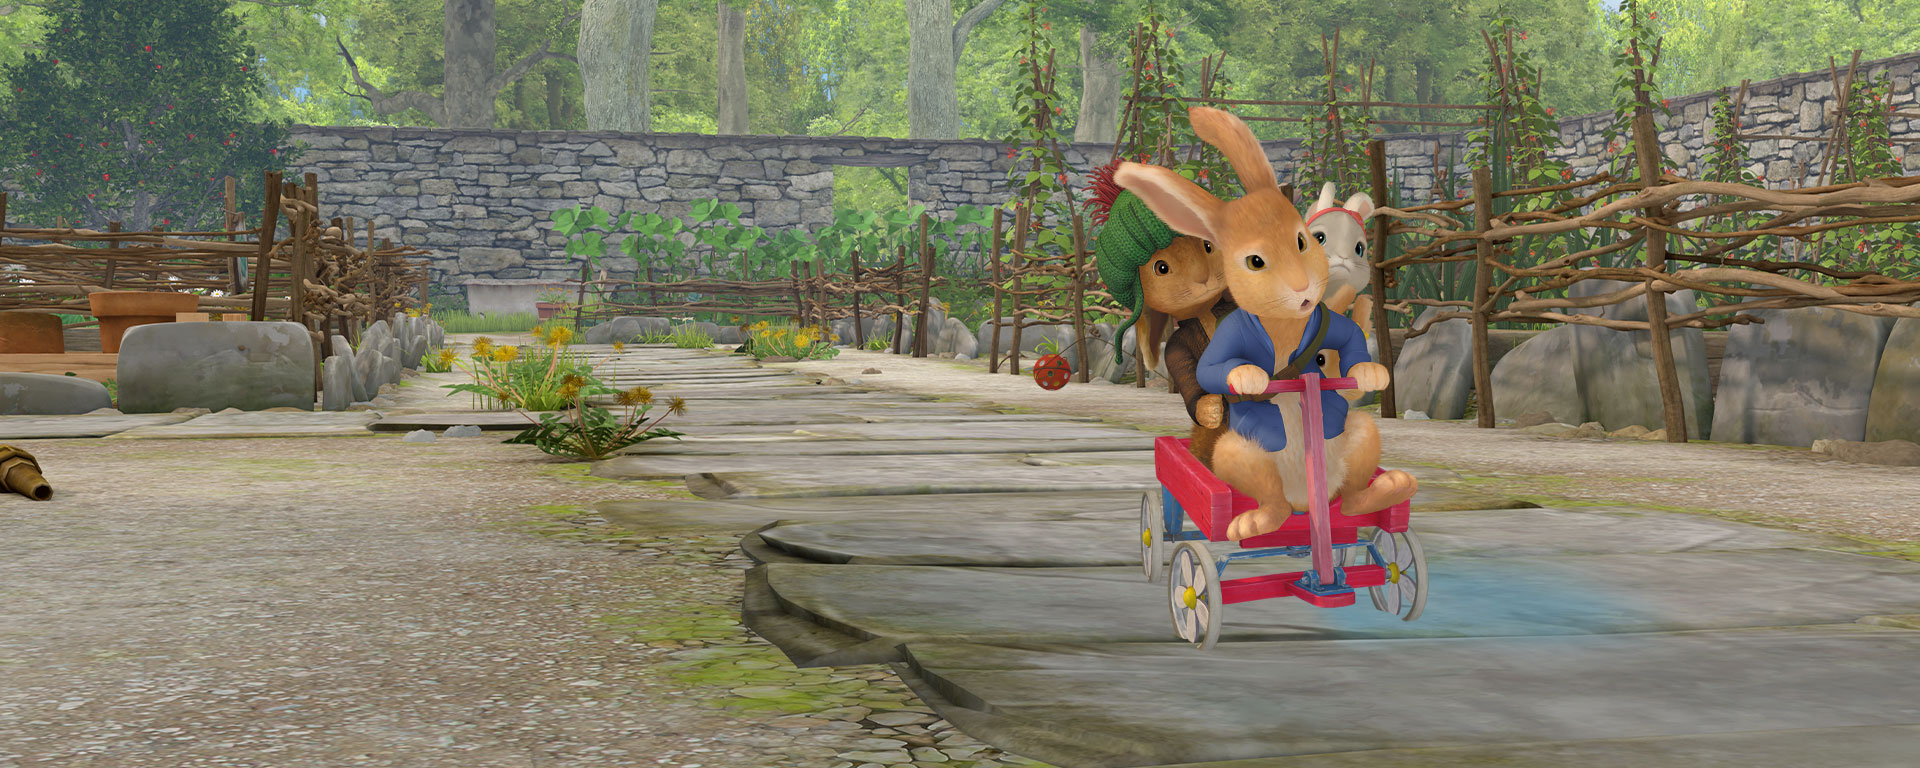 Peter Rabbit riding tricycle